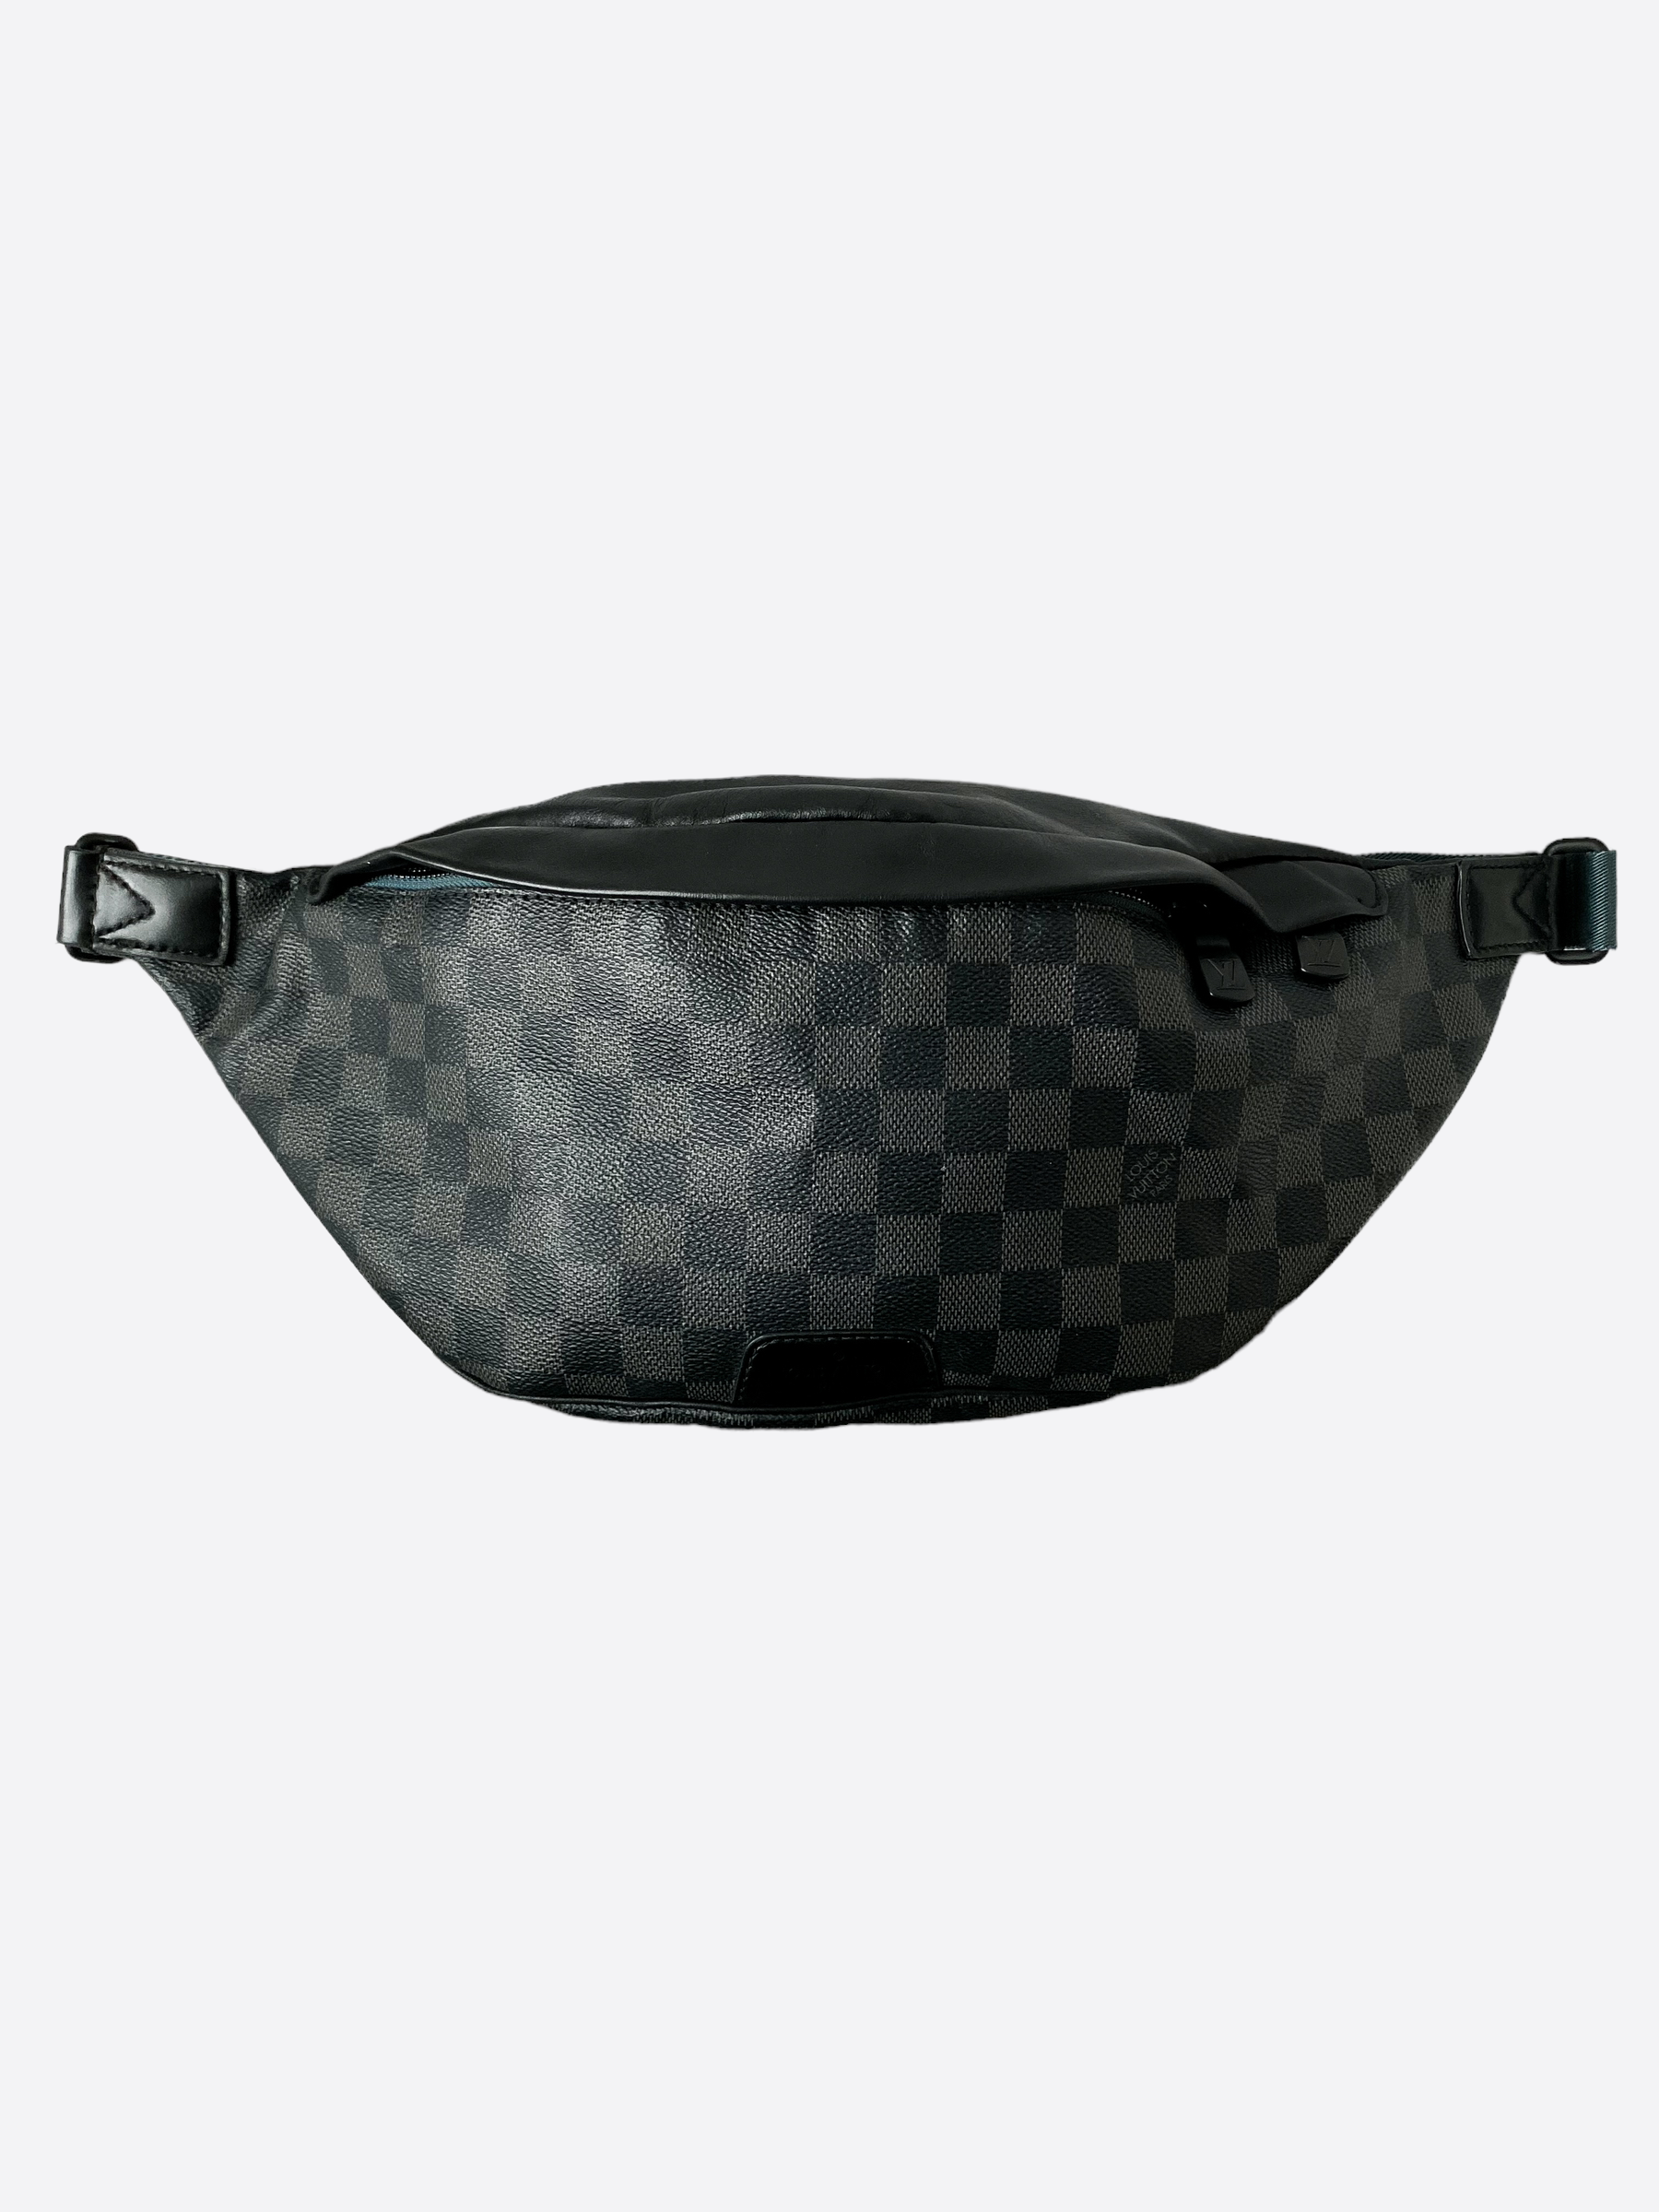 Louis Vuitton Discovery Bumbag Damier Graphite - Bags Valley